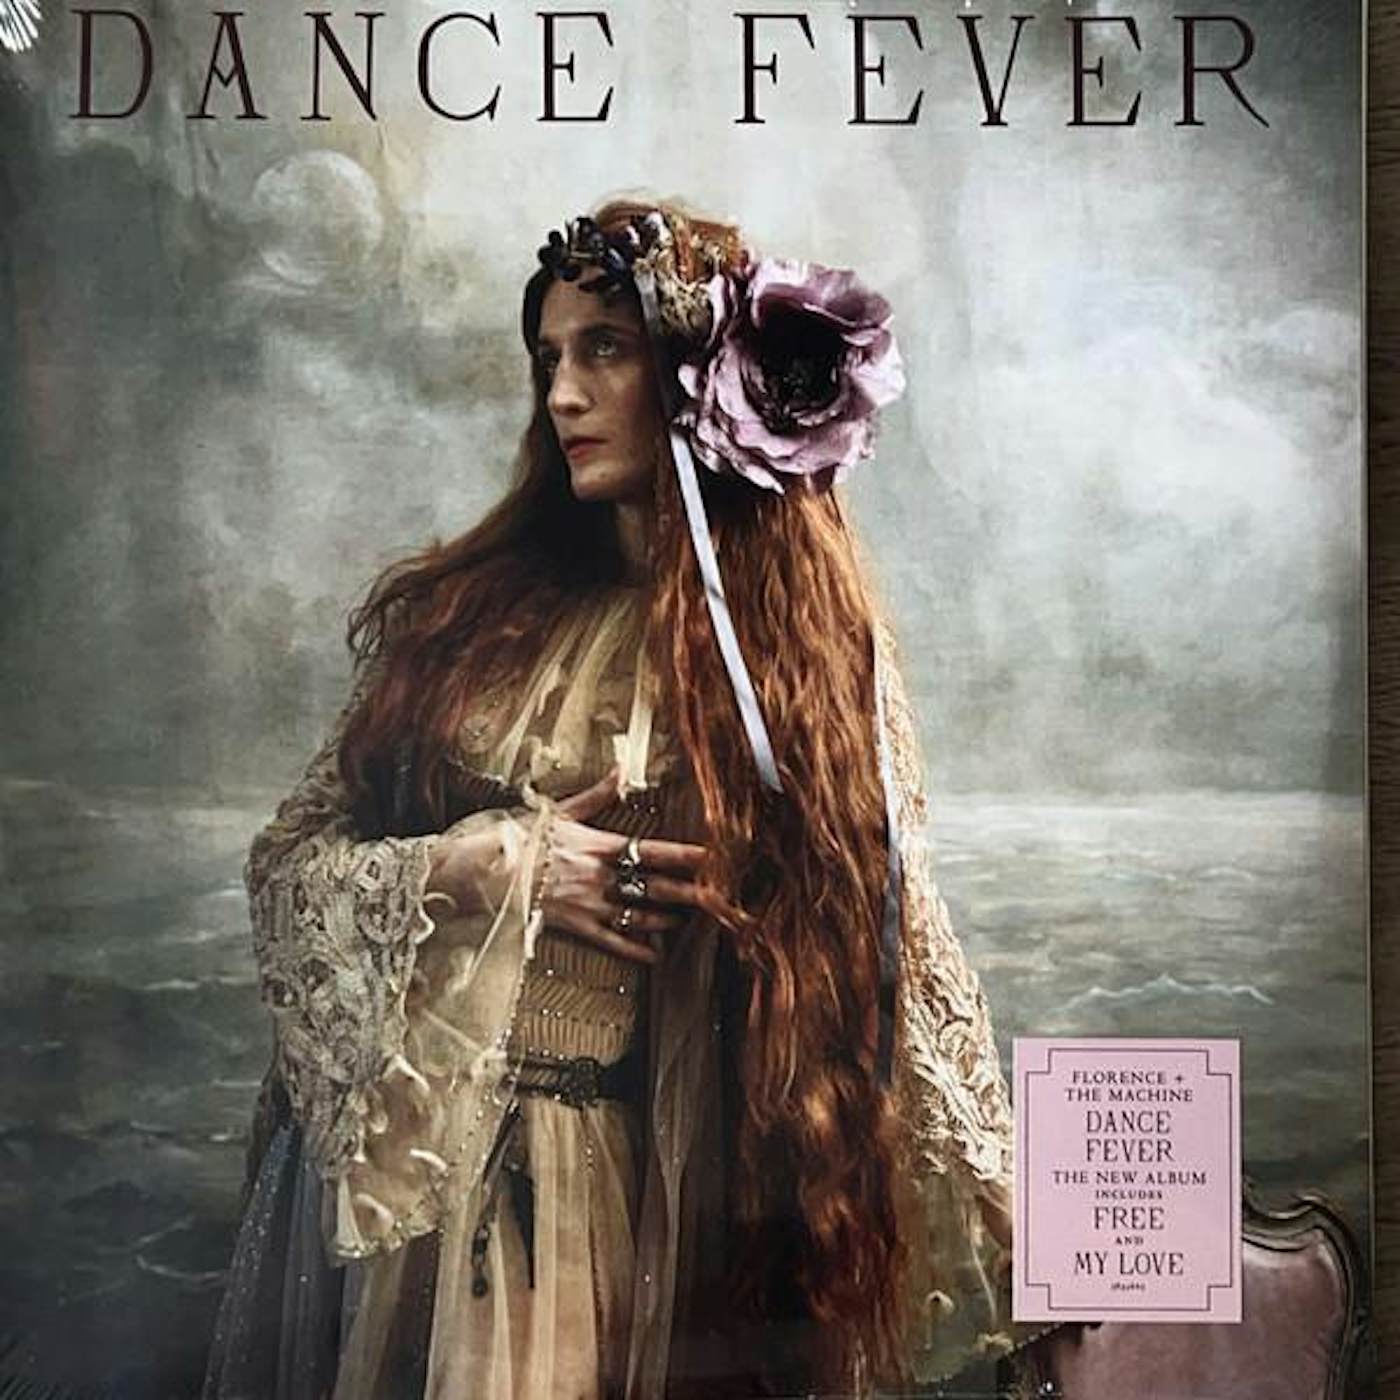 Florence + The Machine Dance Fever Vinyl Record